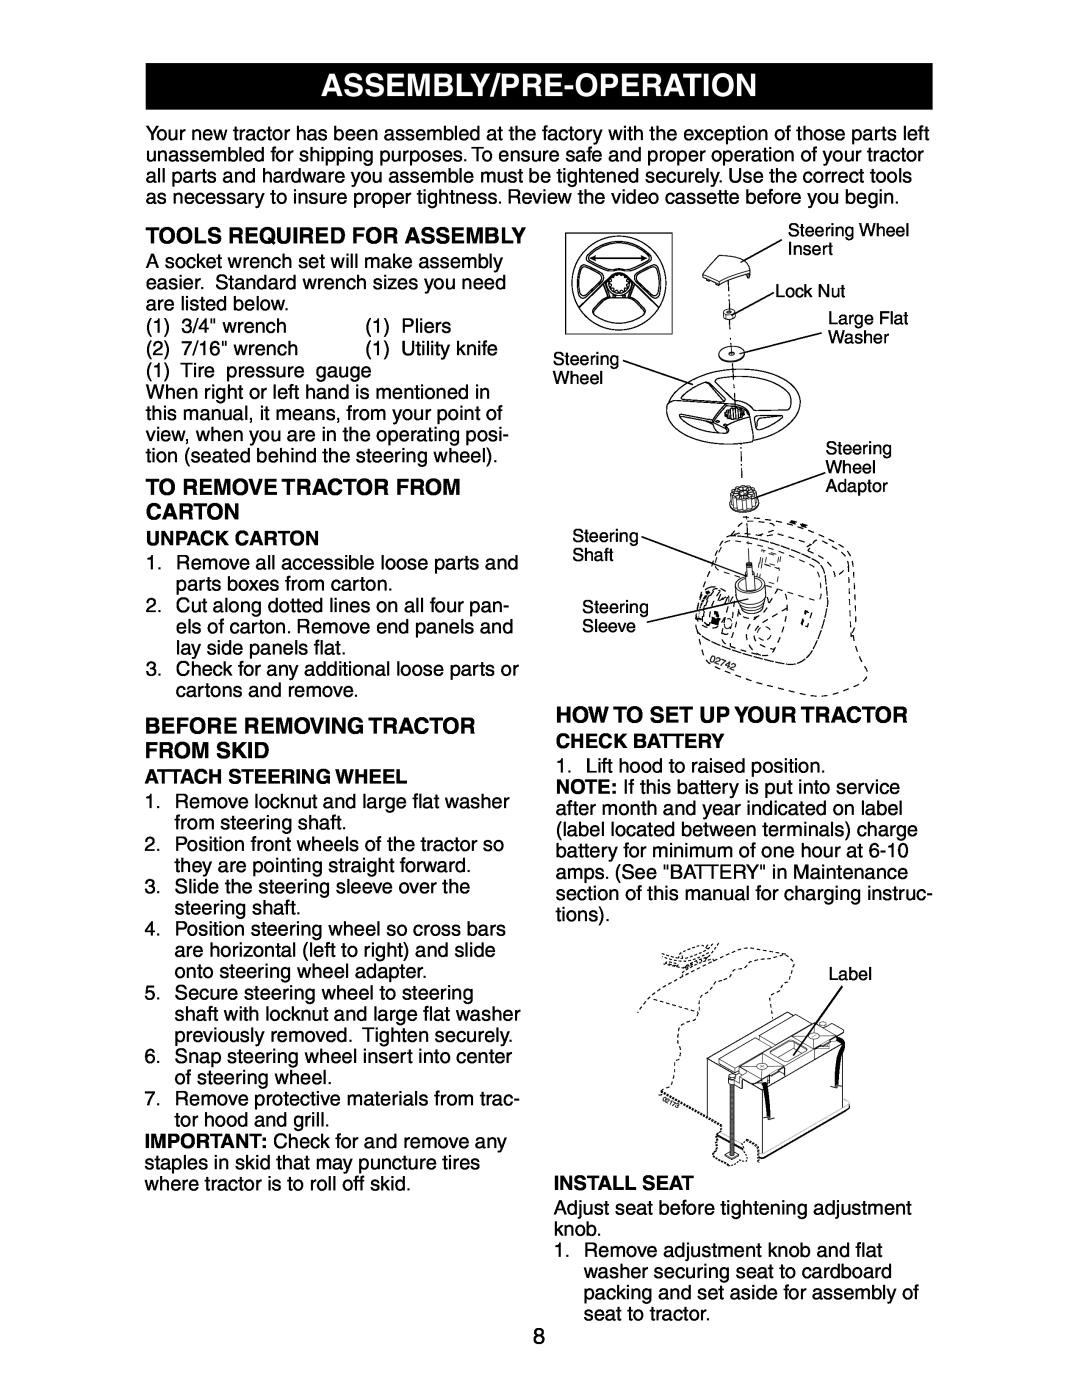 Poulan COGT22H48A Assembly/Pre-Operation, Unpack Carton, Attach Steering Wheel, How To Set Up Your Tractor Check Battery 